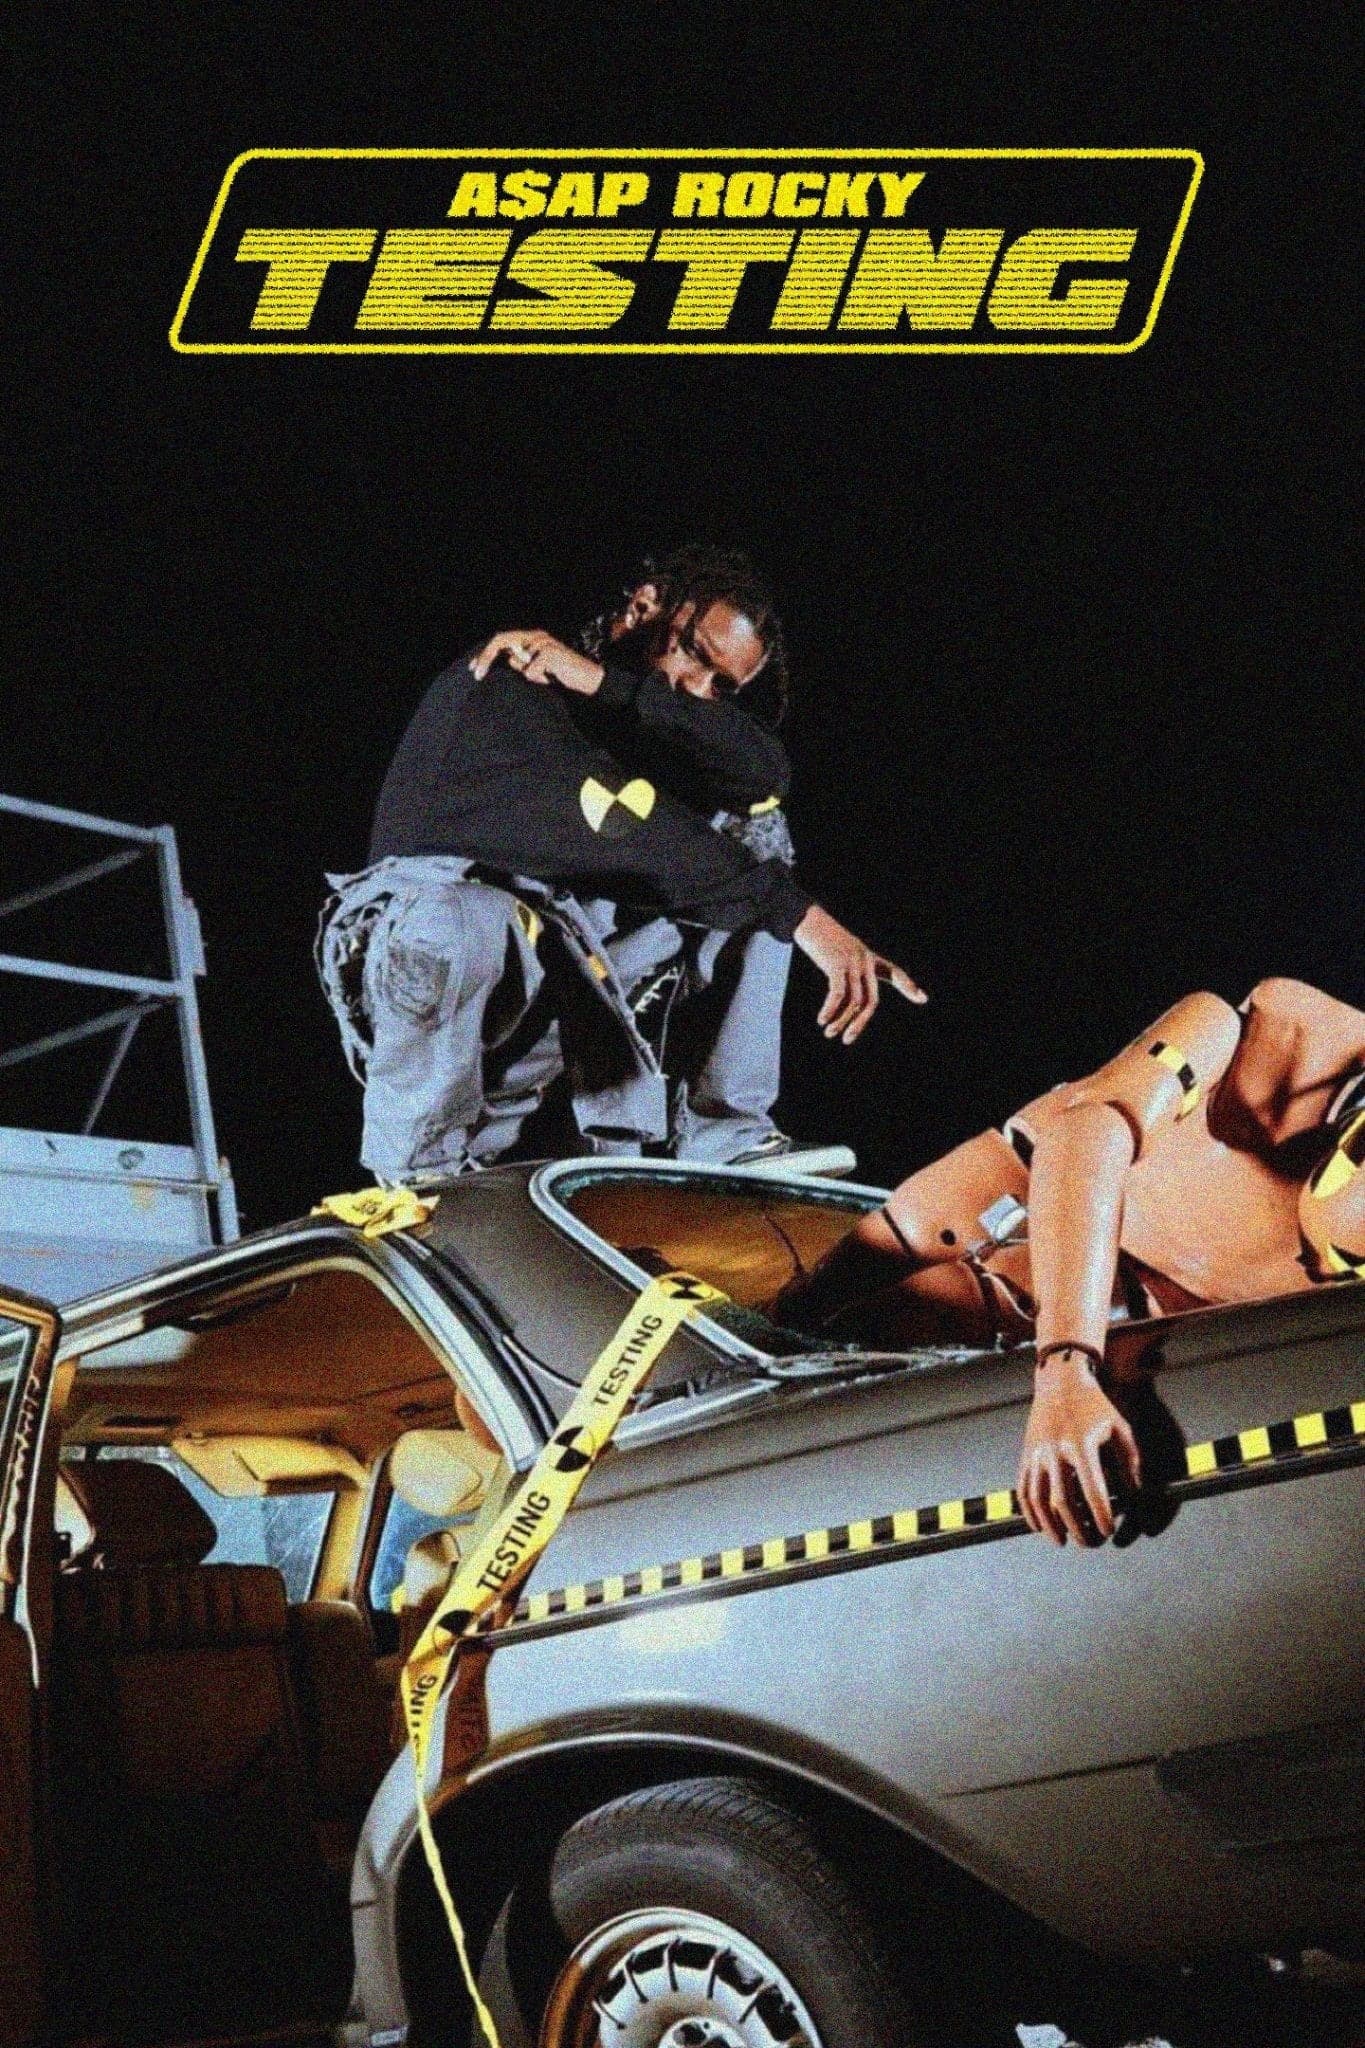 A$AP Rocky ‘Testing’ Poster - Posters Plug